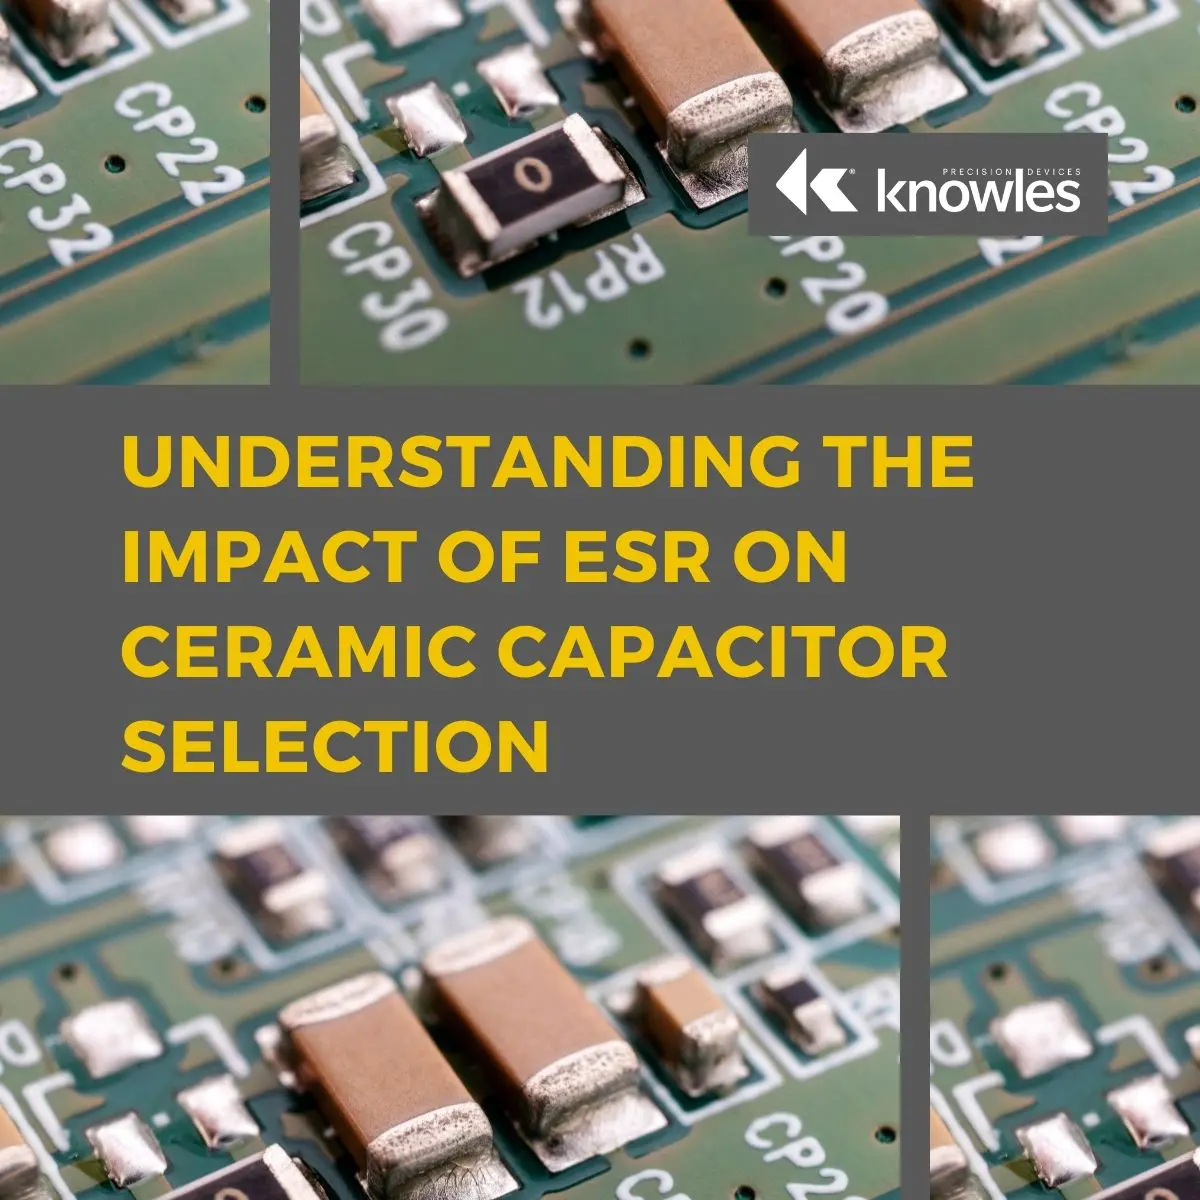 Understanding the Impact of ESR on Ceramic Capacitor Selection